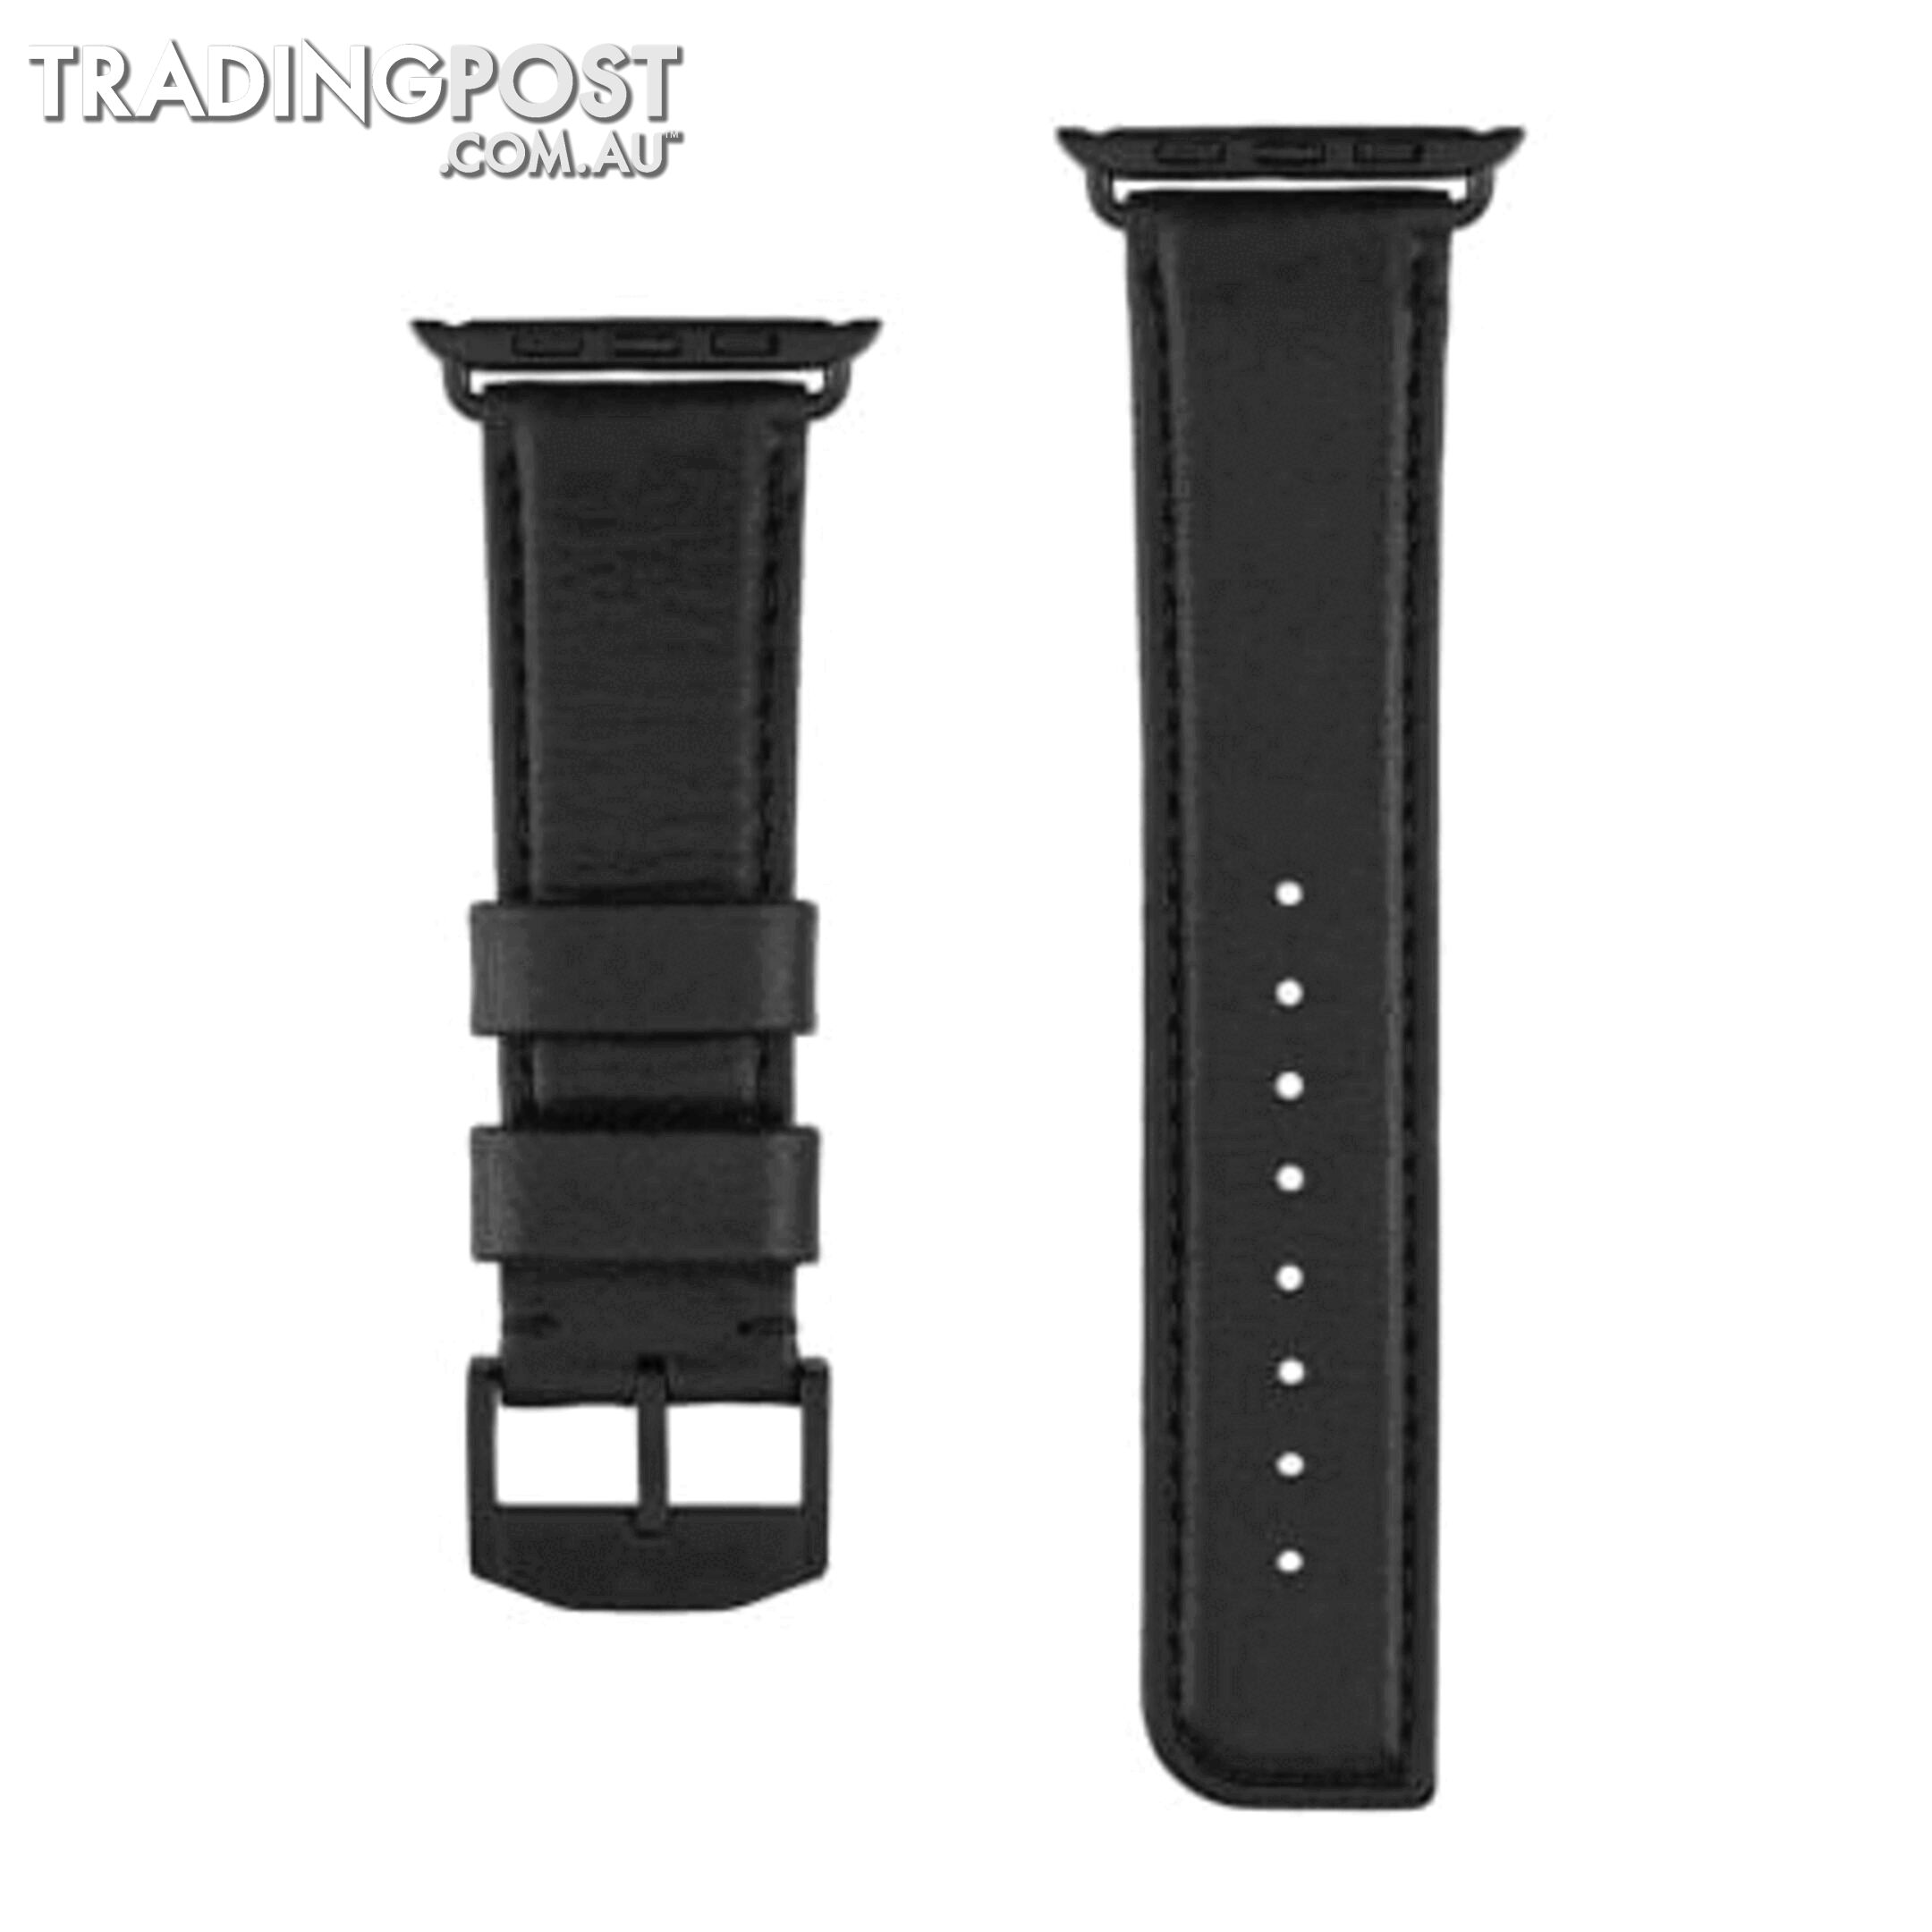 Case-Mate Signature Leather Apple Watch band For Apple Watch 42mm - Case-Mate - Tobacco - 846127171083